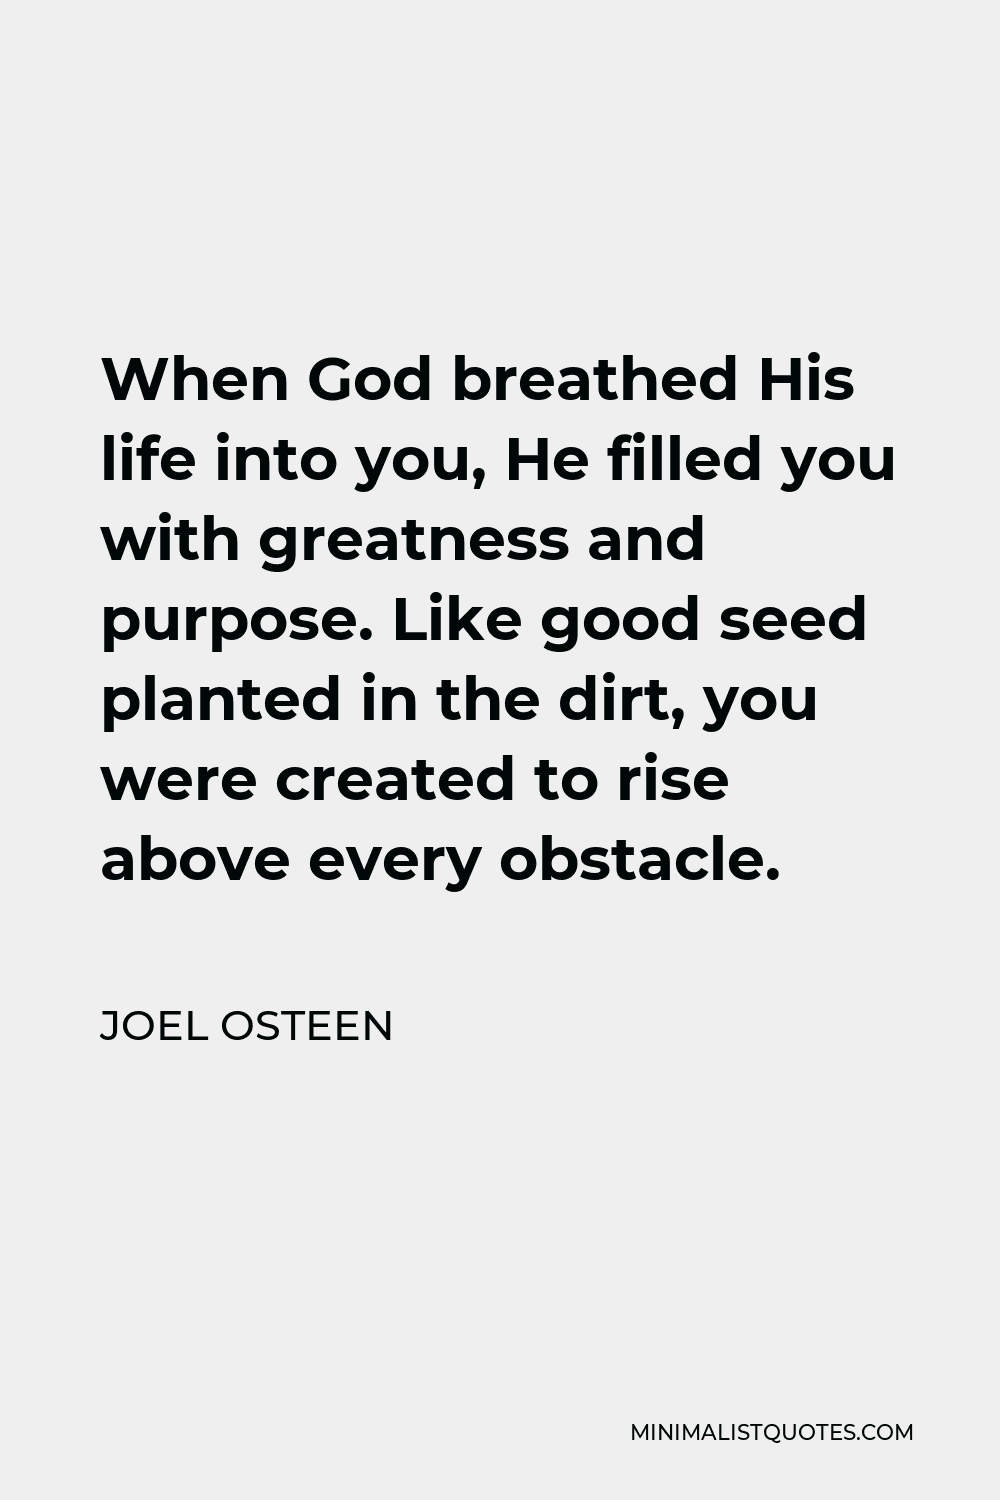 Joel Osteen Quote - When God breathed His life into you, He filled you with greatness and purpose. Like good seed planted in the dirt, you were created to rise above every obstacle.